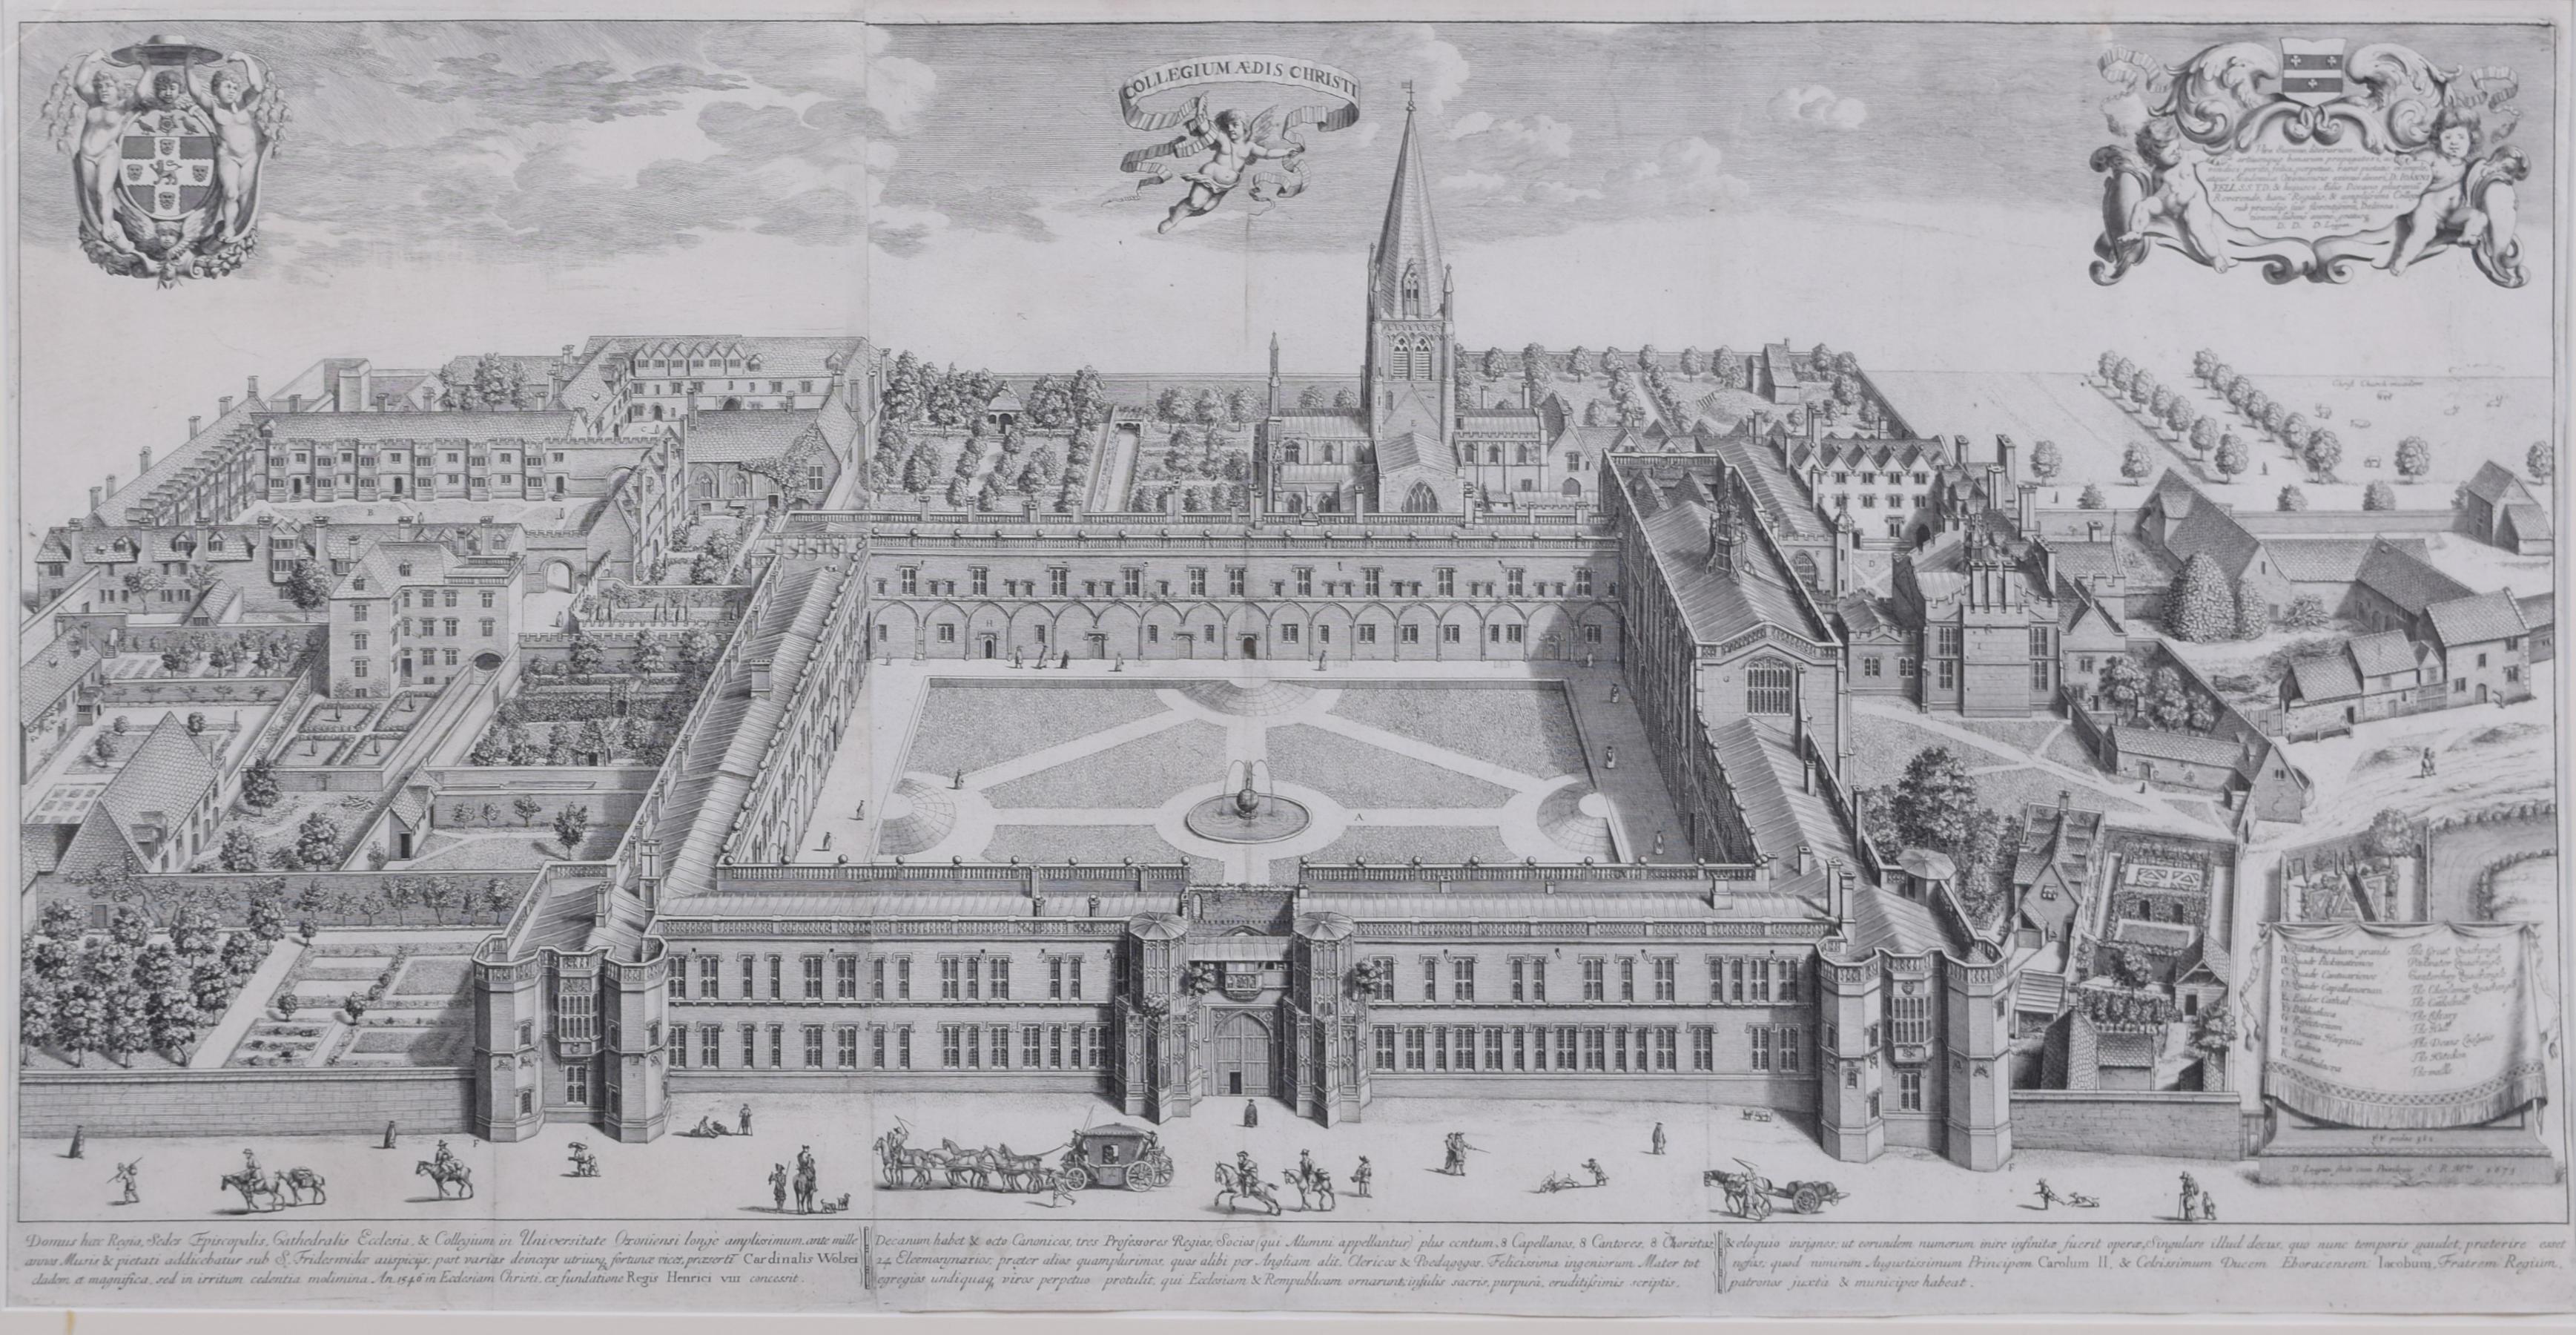 To see our other views of Oxford and Cambridge, scroll down to "More from this Seller" and below it click on "See all from this seller" - or send us a message if you cannot find the view you want.

David Loggan (1634 - 1692)
Christ Church, Oxford